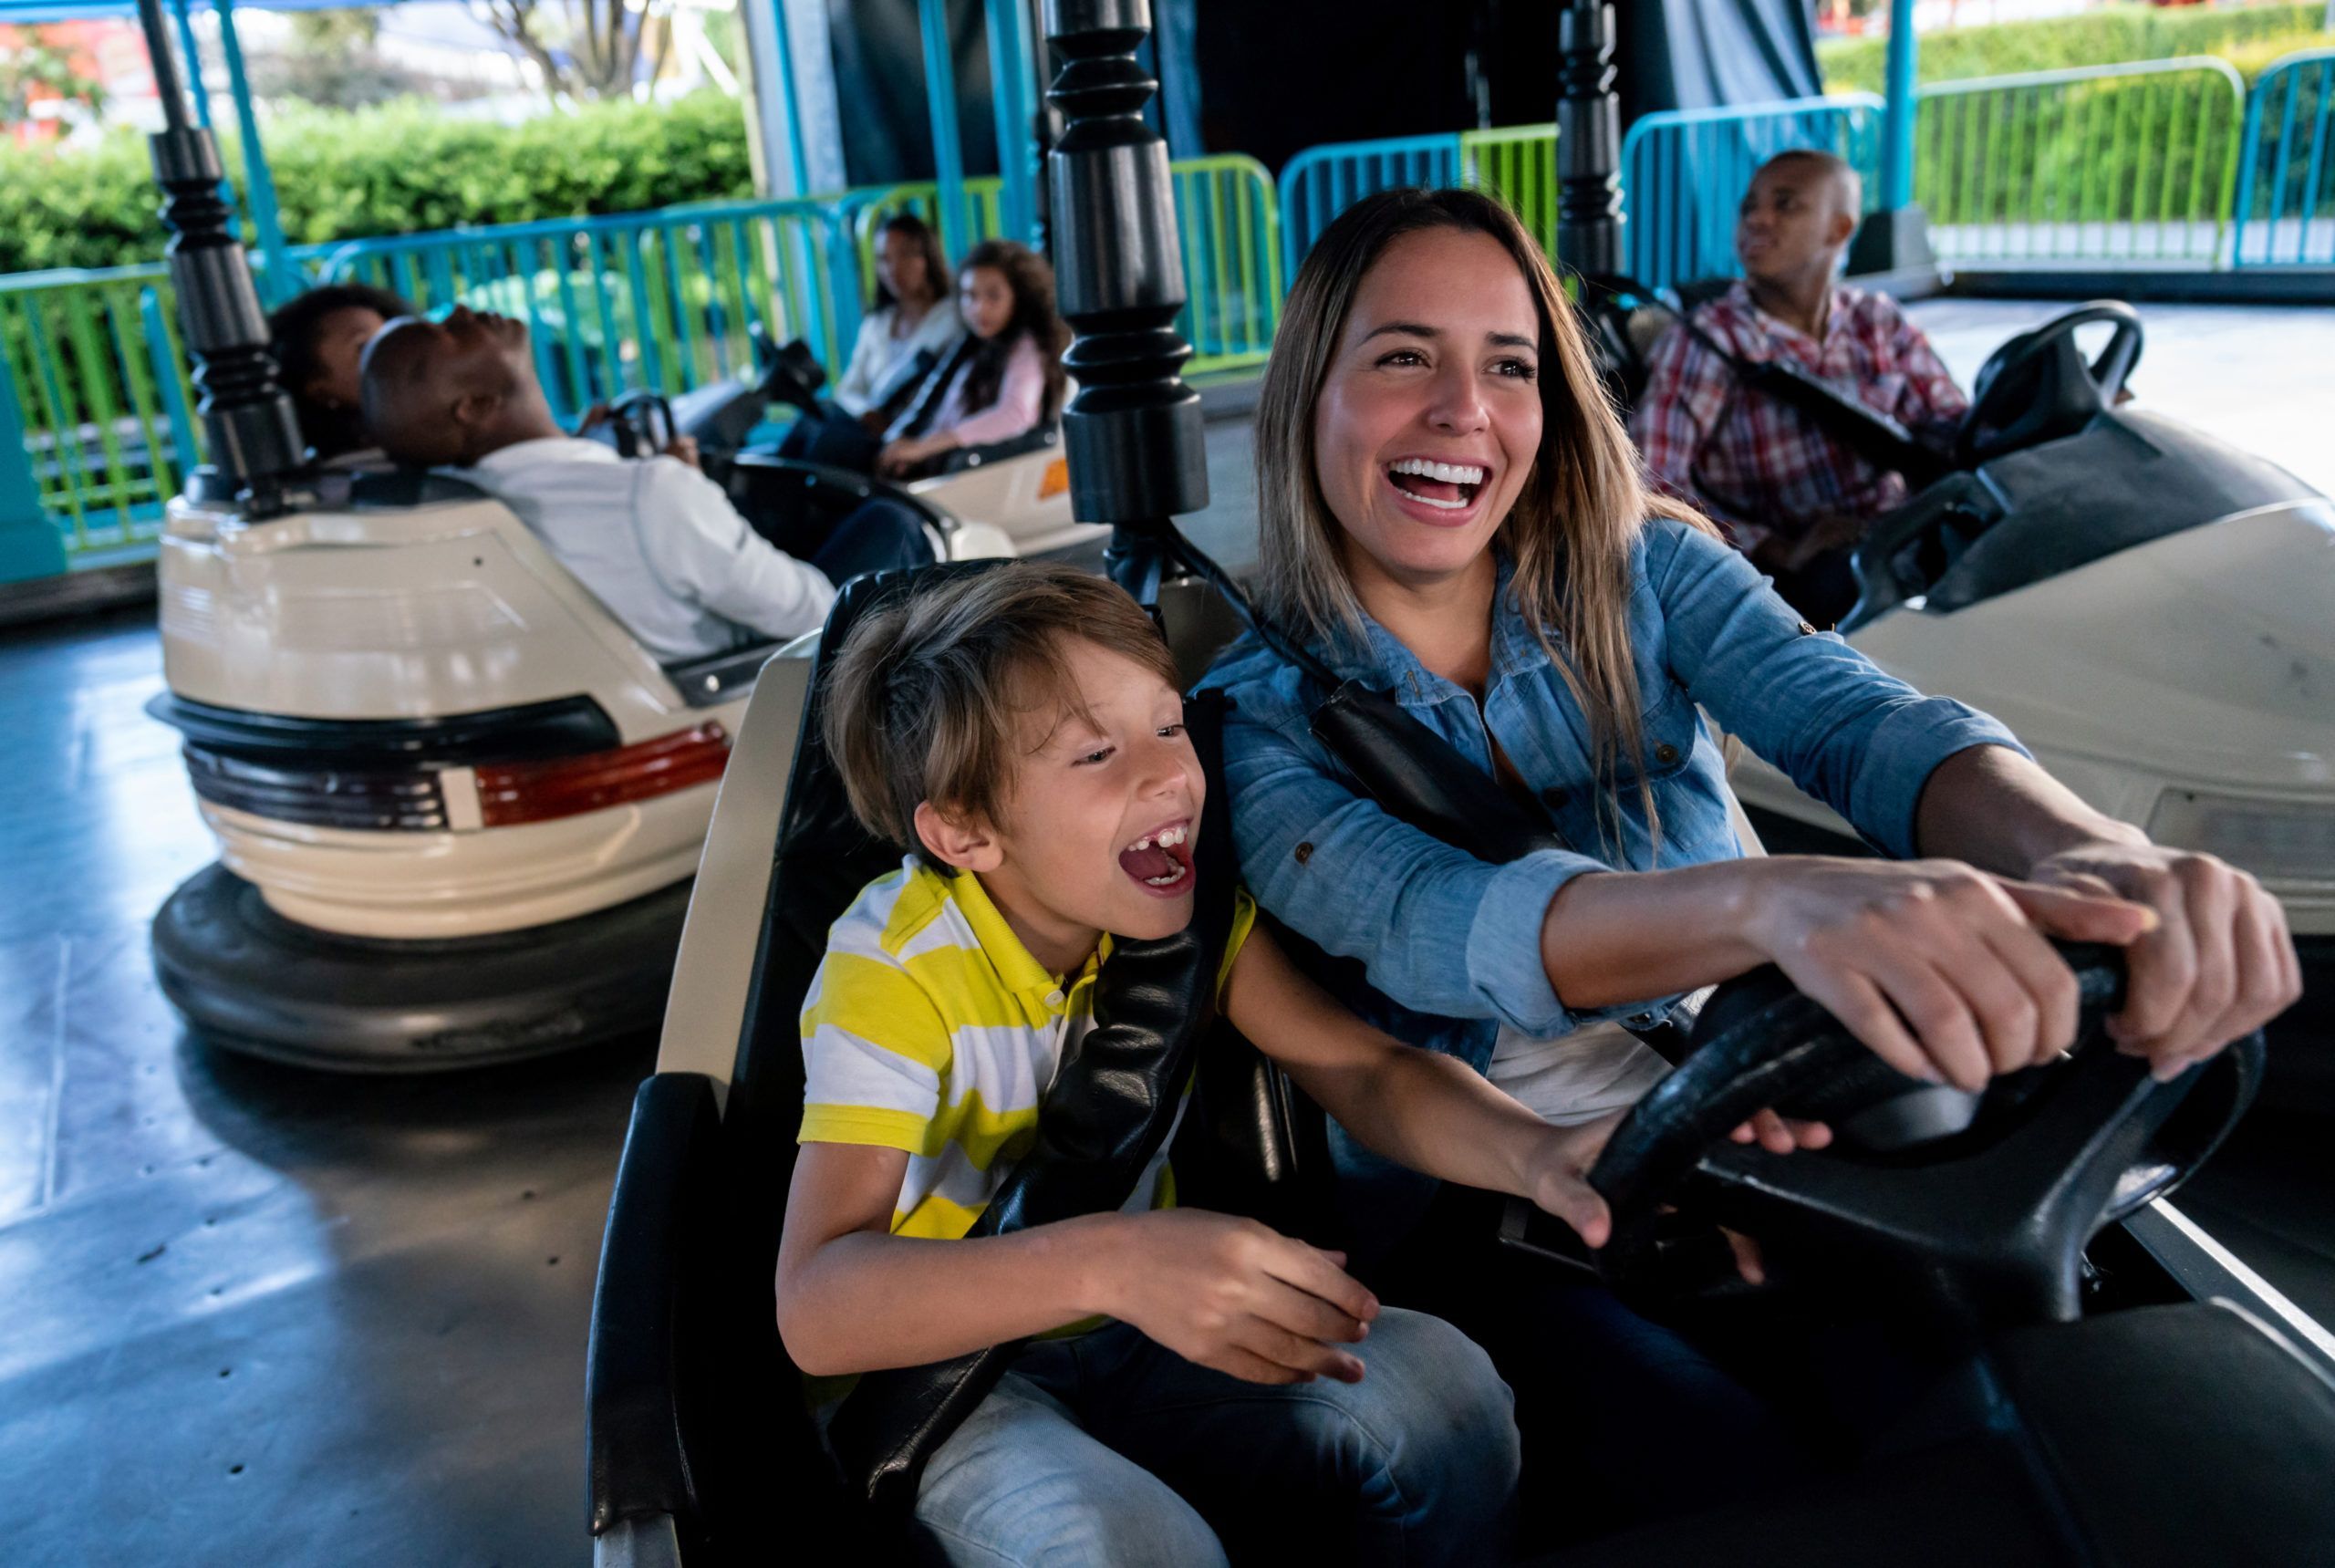 Happy mother and son having fun on the bumper cars at an amusement park - lifestyle concepts